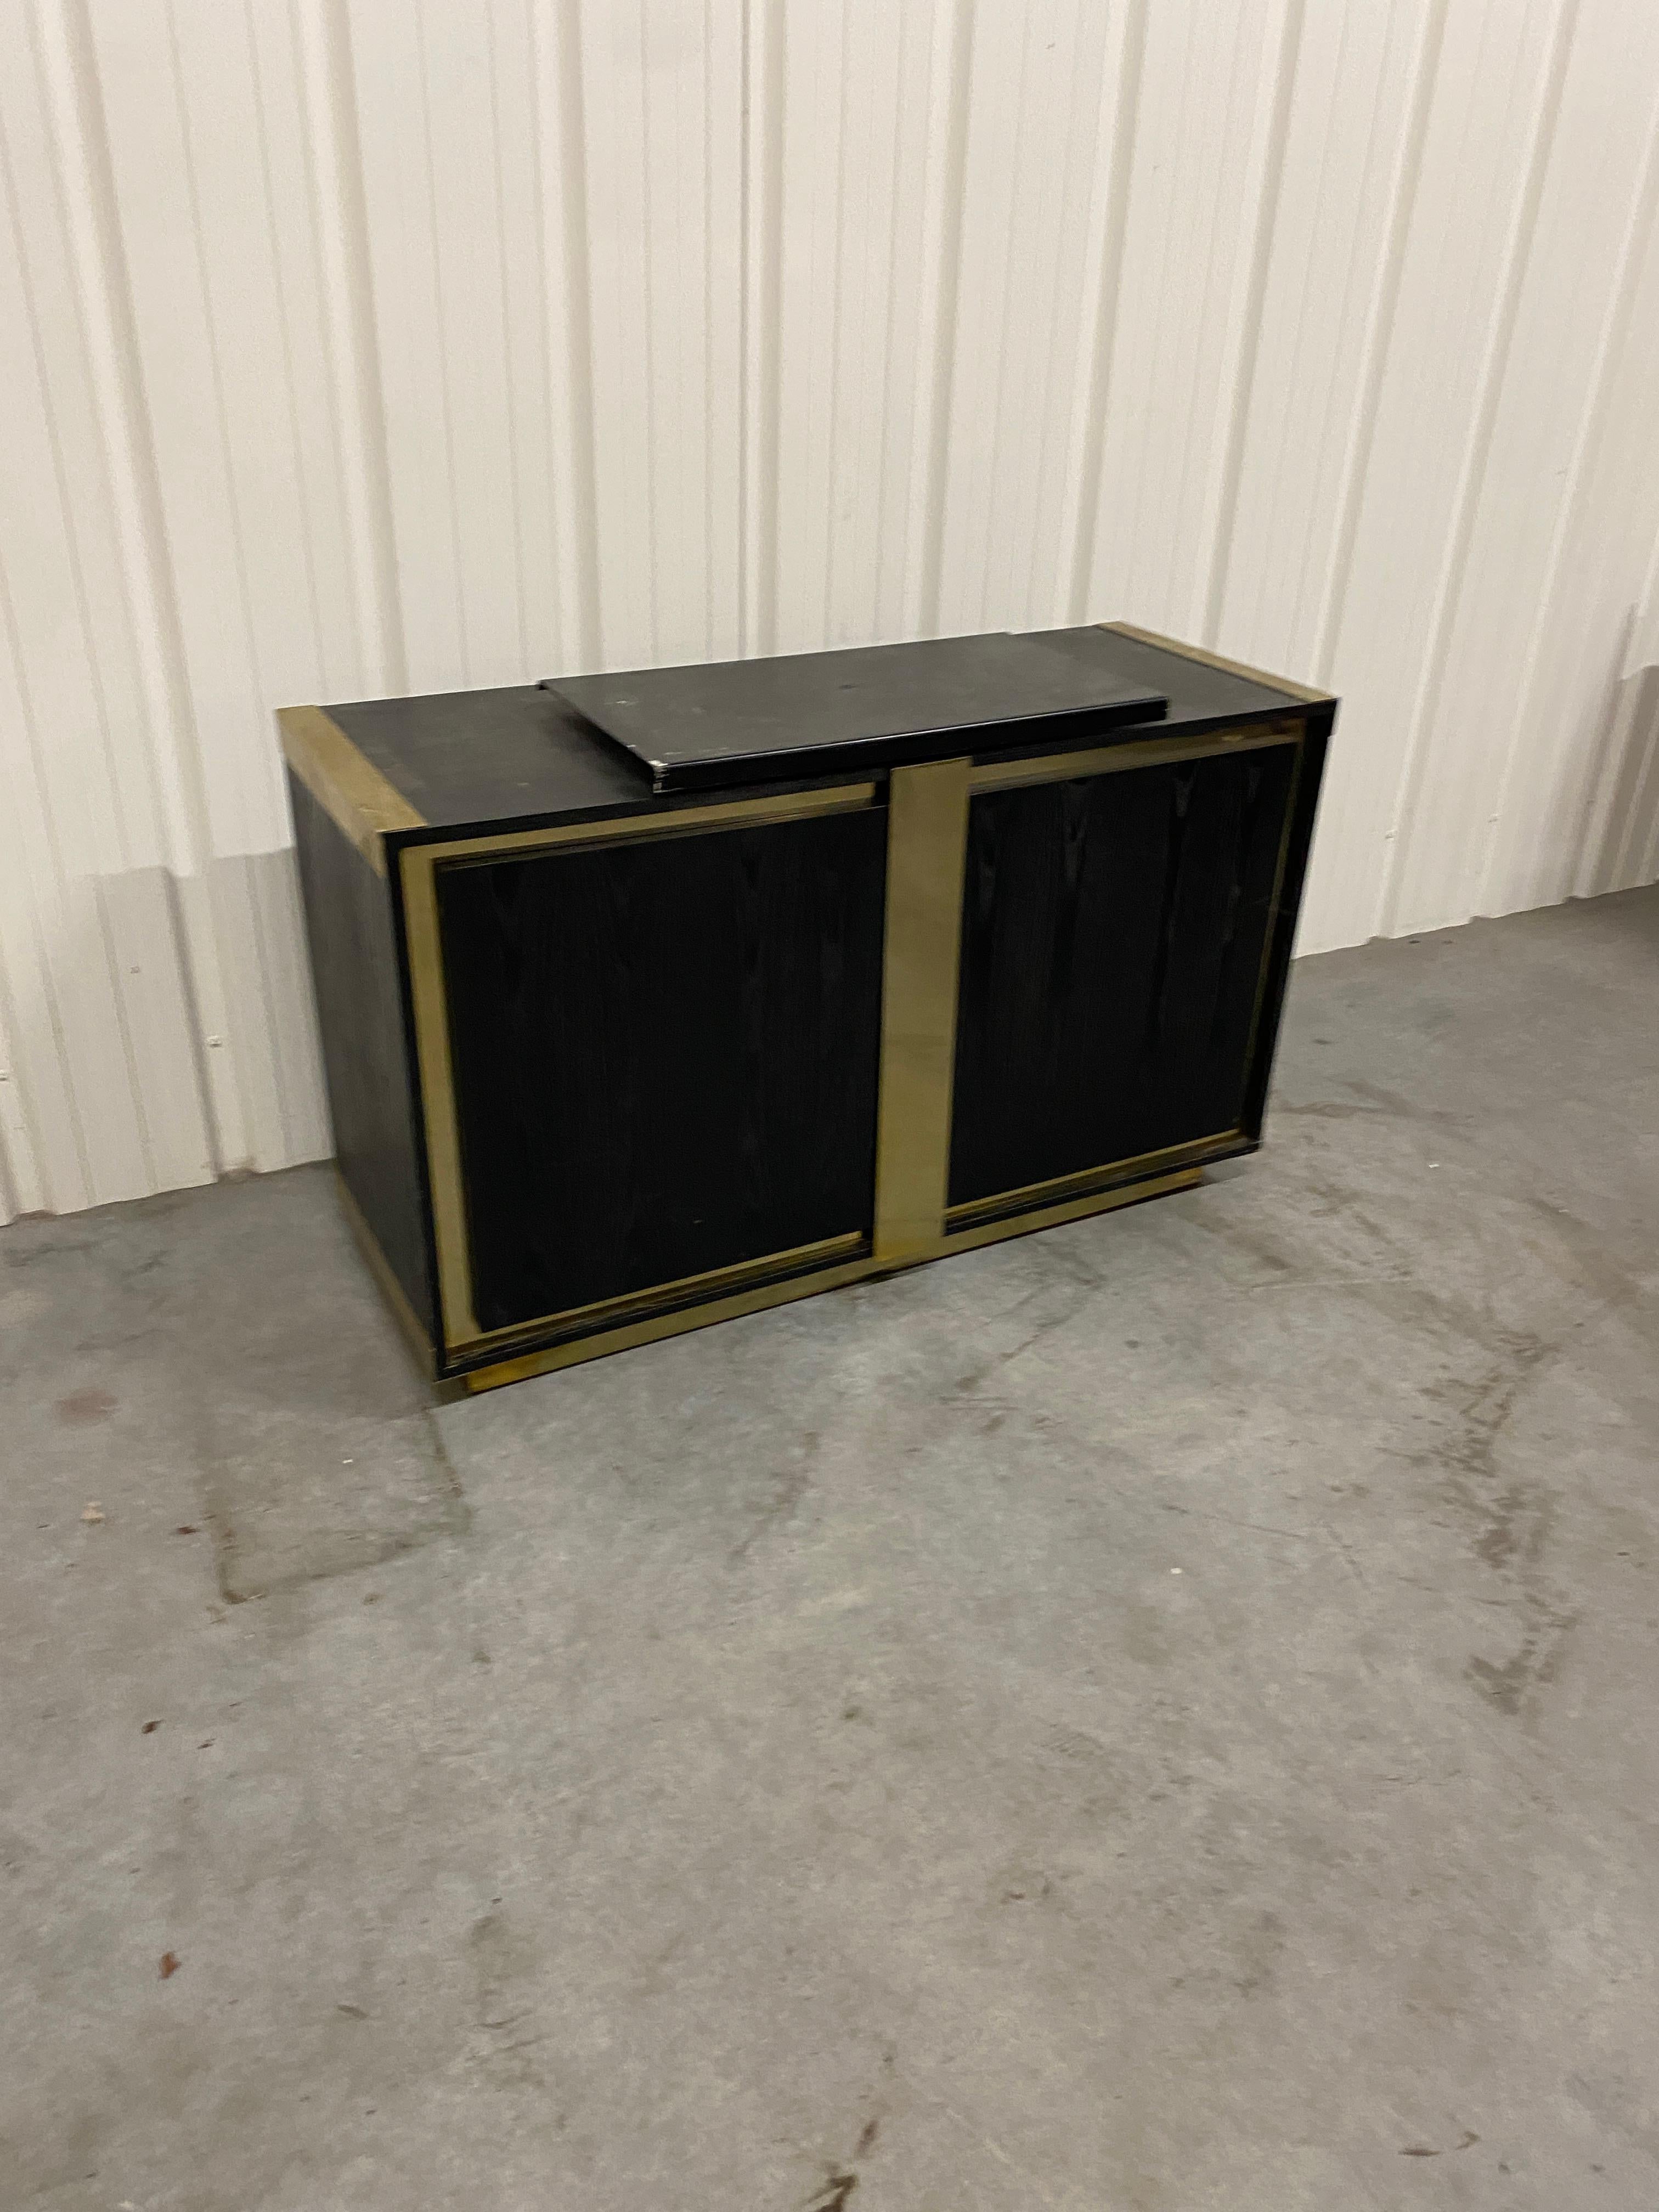 Small sideboard in blackened oak and brass circa 1970
currently equipped with a sliding and rotating tray to place a television, a computer, etc.
two glass shelves inside